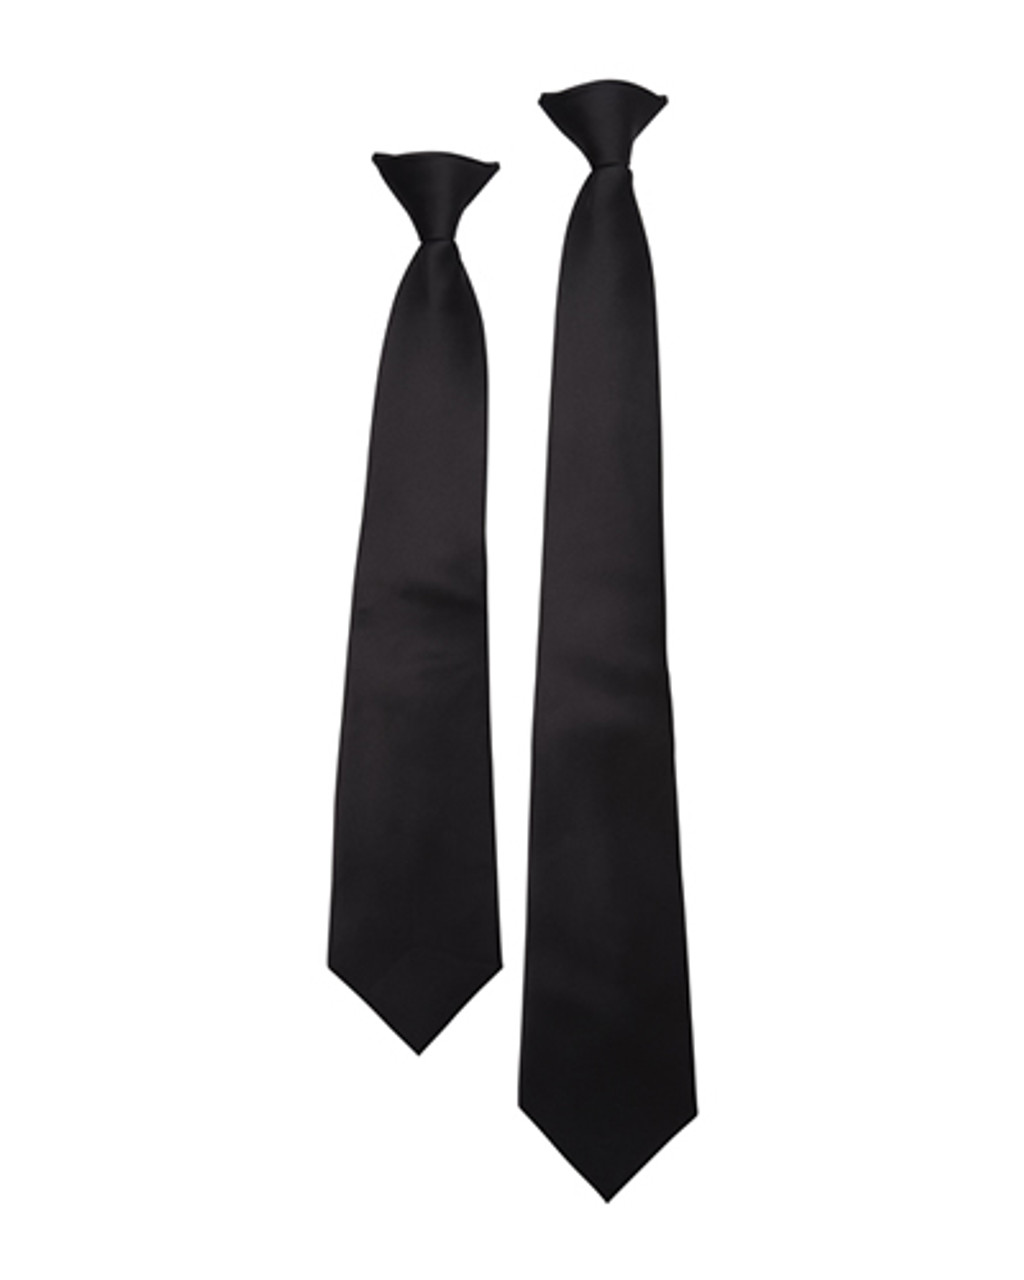 Tie chains, 2 Styles for men in stock